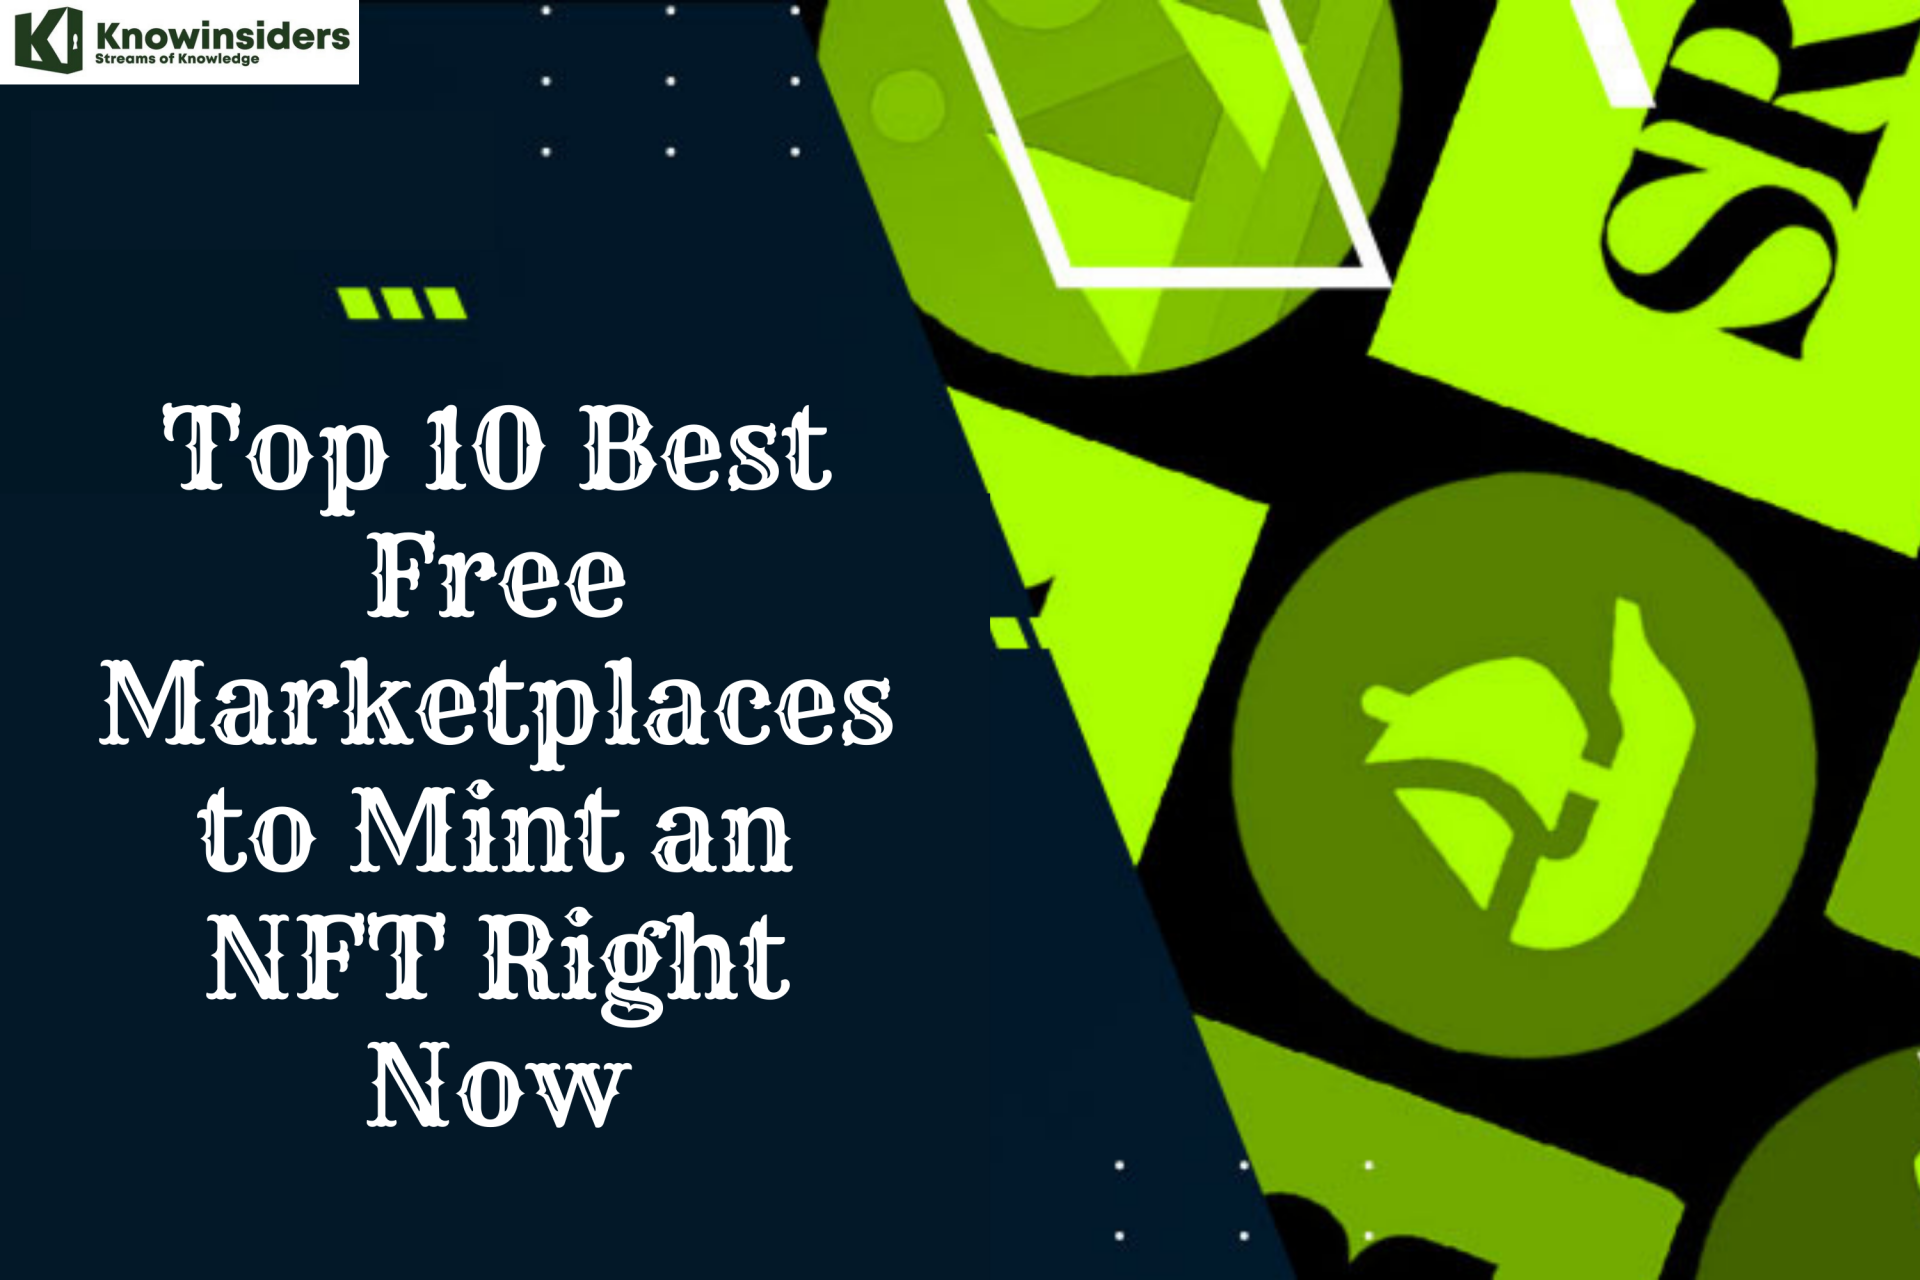 Top 10 Best Free Marketplaces to Mint an NFT Right Now